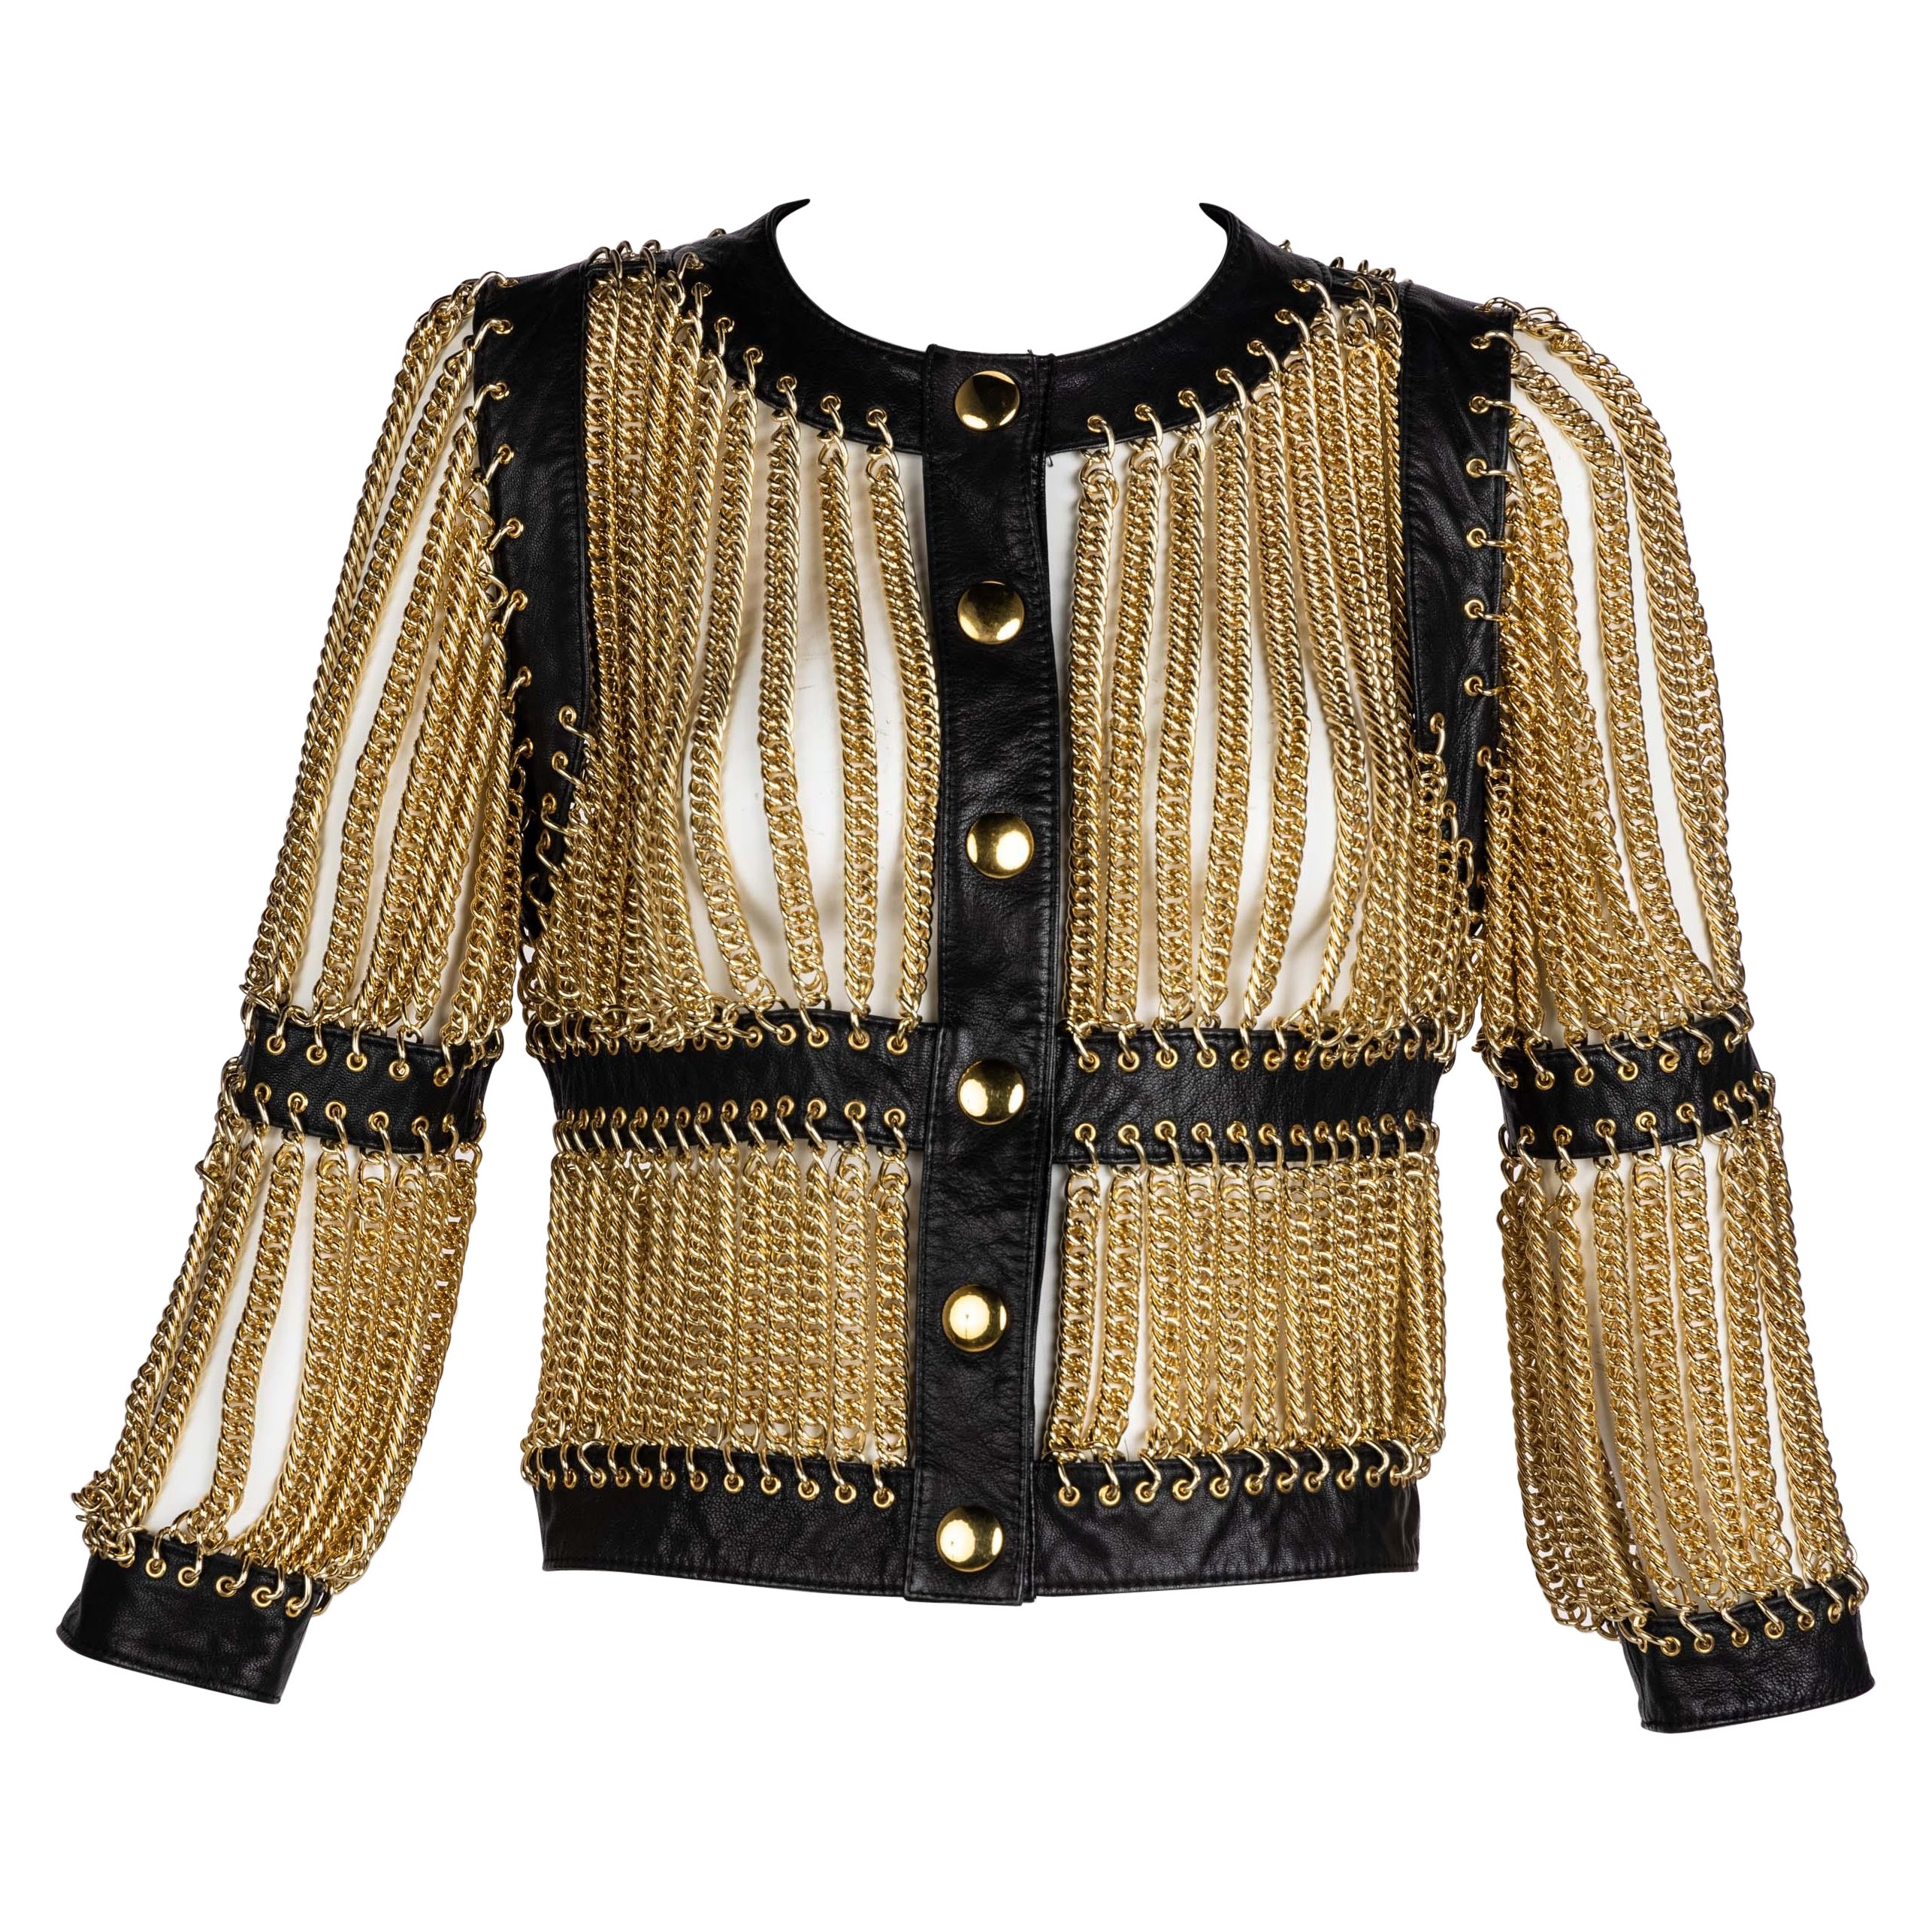 Moschino Archive Gold Chain Leather Jacket JLO Spring 2010 For Sale